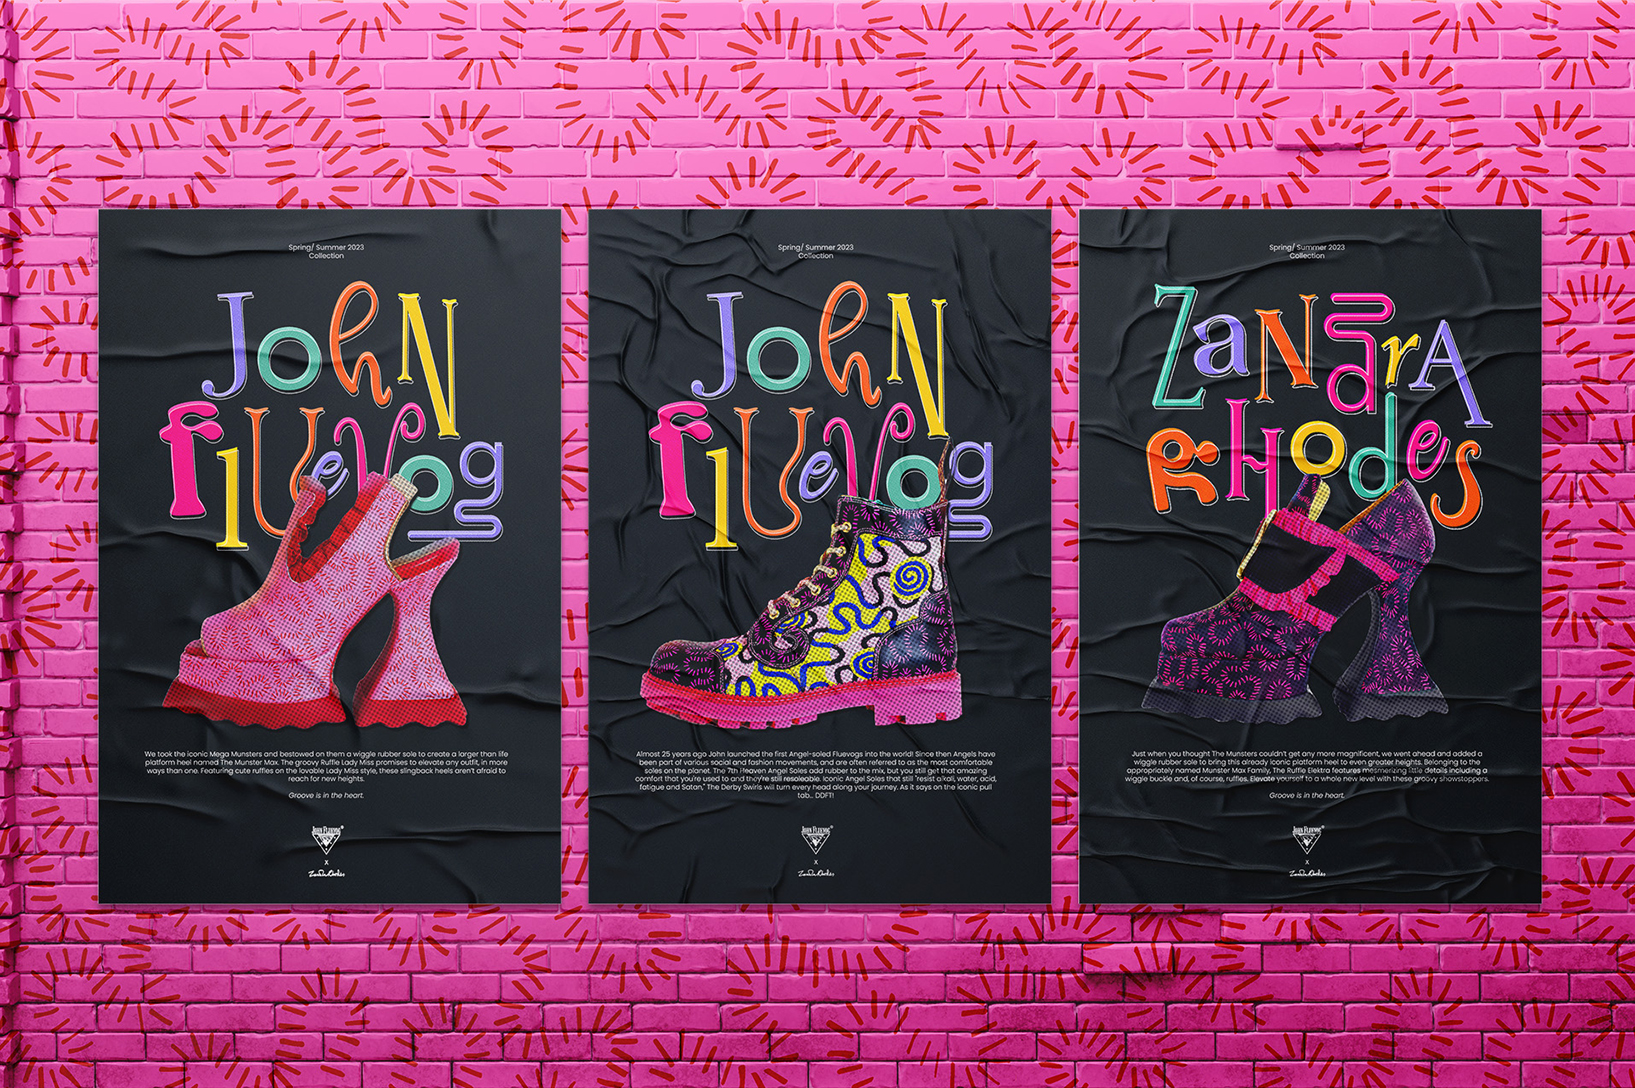 A collaboration between John Fluevog and Zandra Rhrodes, packaging and tags